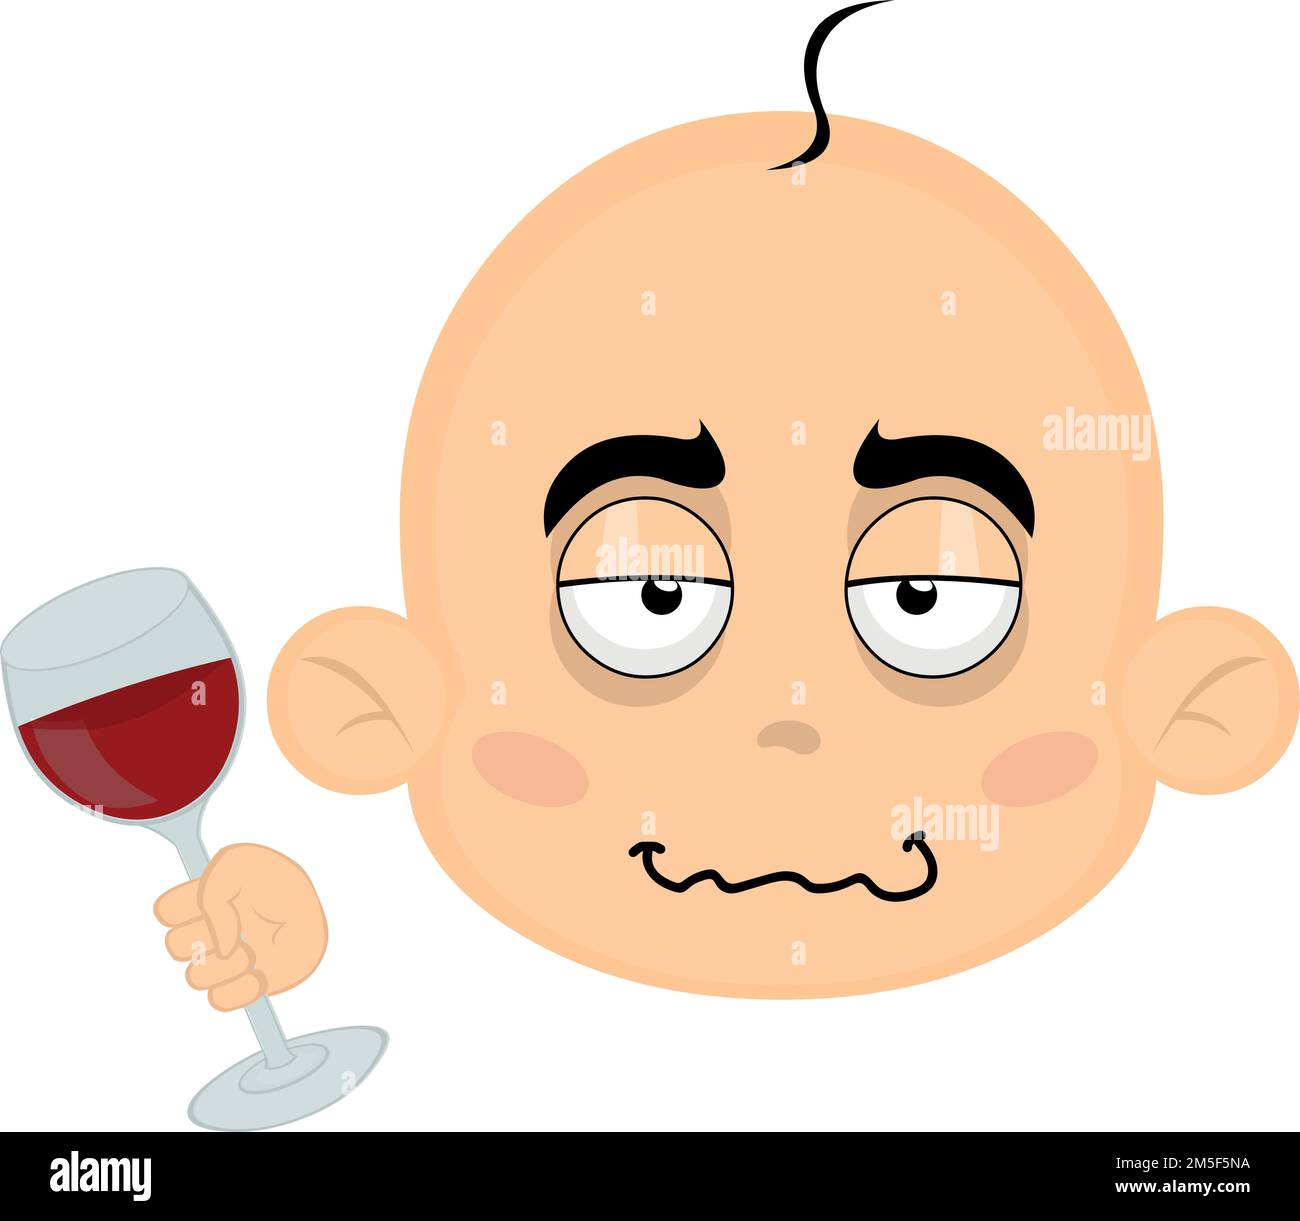 vector illustration of the face of a drunk cartoon baby with a glass of wine in his hand Stock Vector